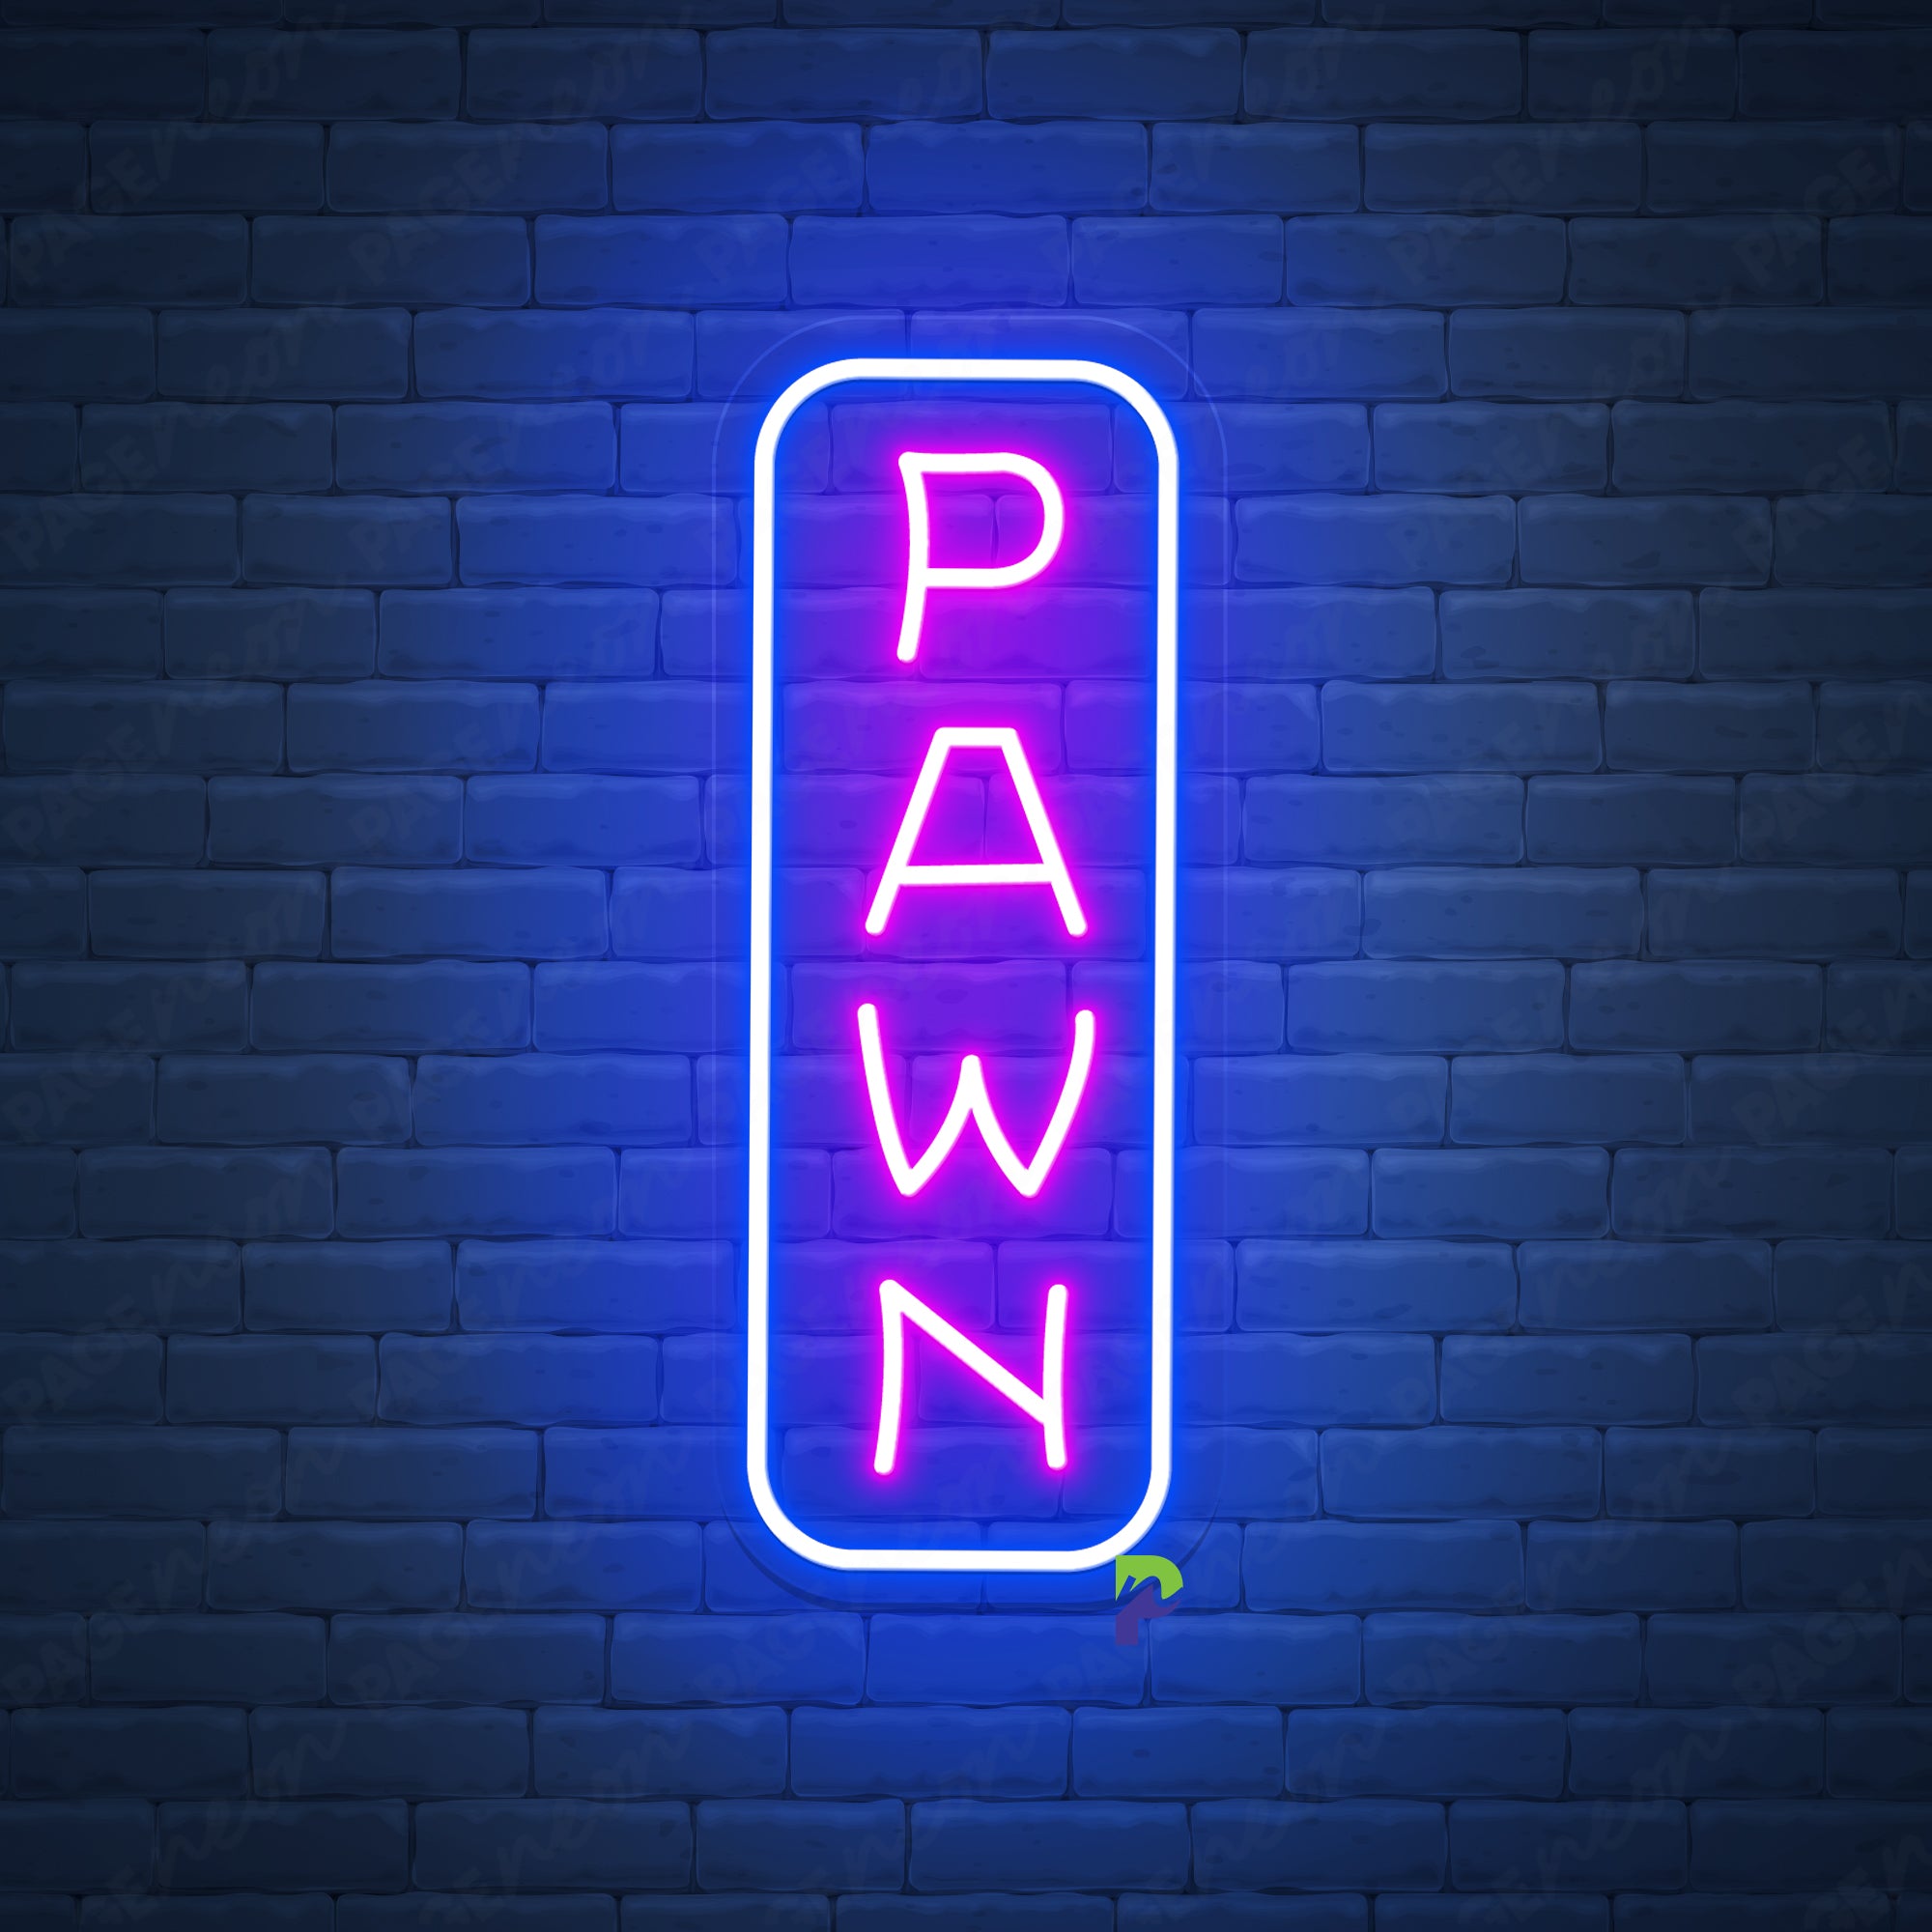 Pawn Shop Neon Signs Vertical Led Light